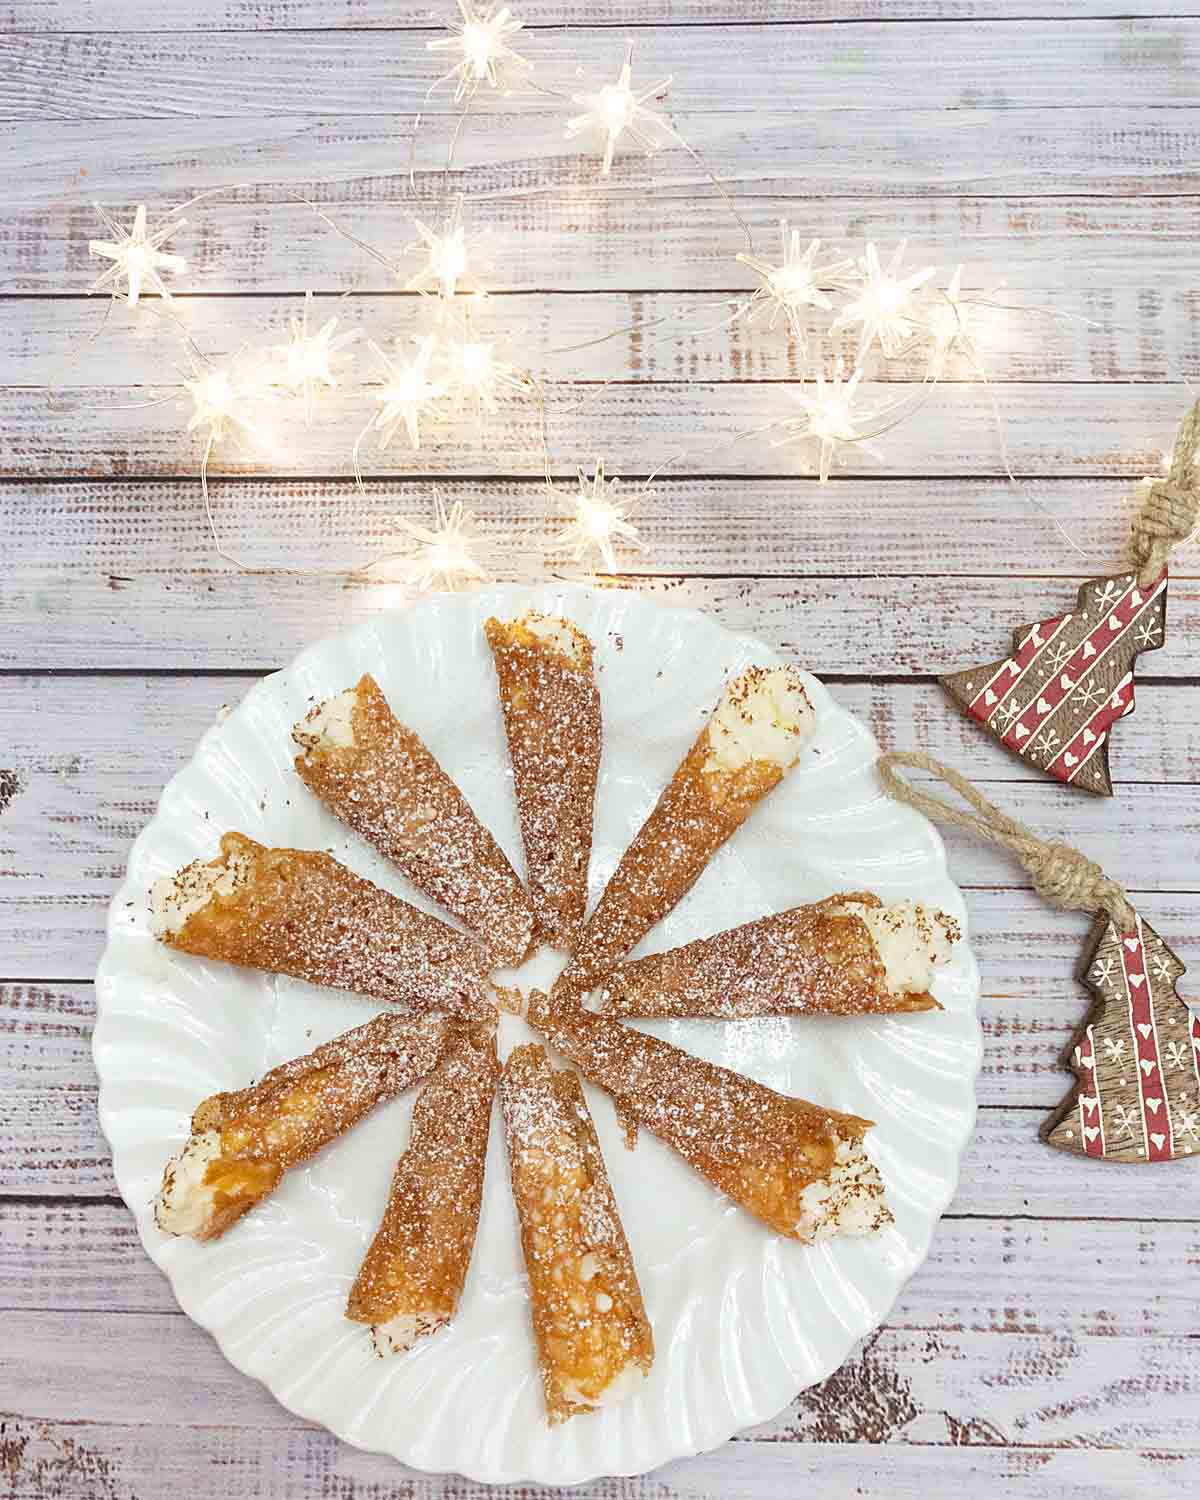 Lacy, sweet and crisp with a creamy filling, brandy snaps are a tasty and impressive British cookie that's perfect for the holidays.